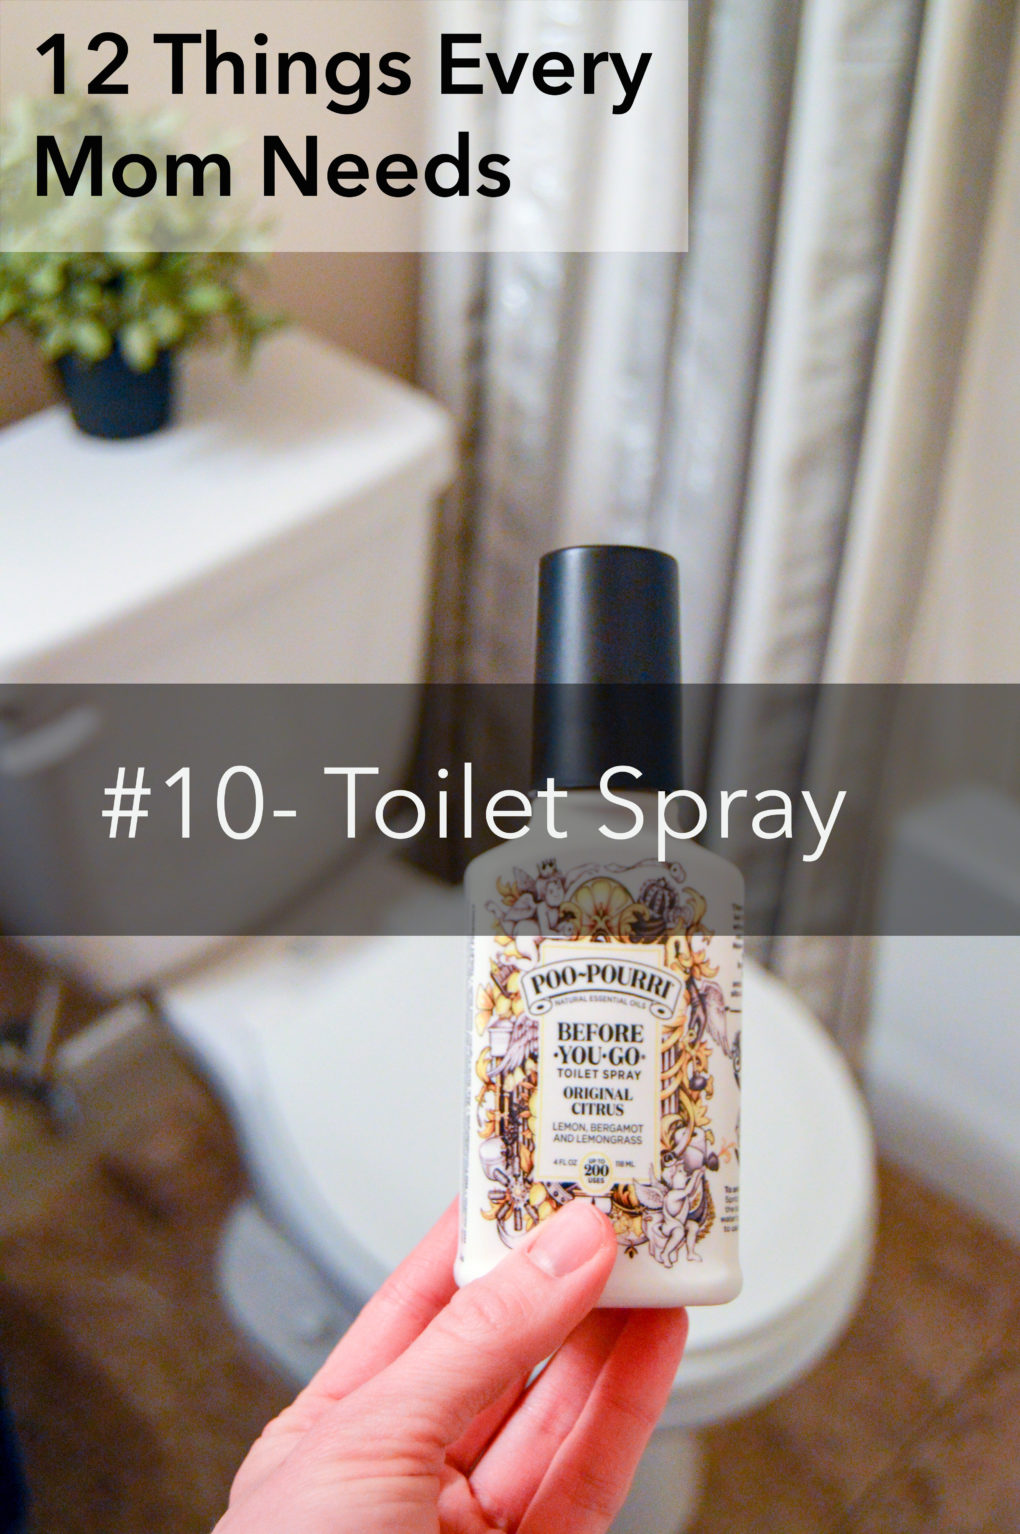 #10- poo-pourri toilet spray. List of 12 household things every mom needs. Gift ideas for mom. What a new mom needs.